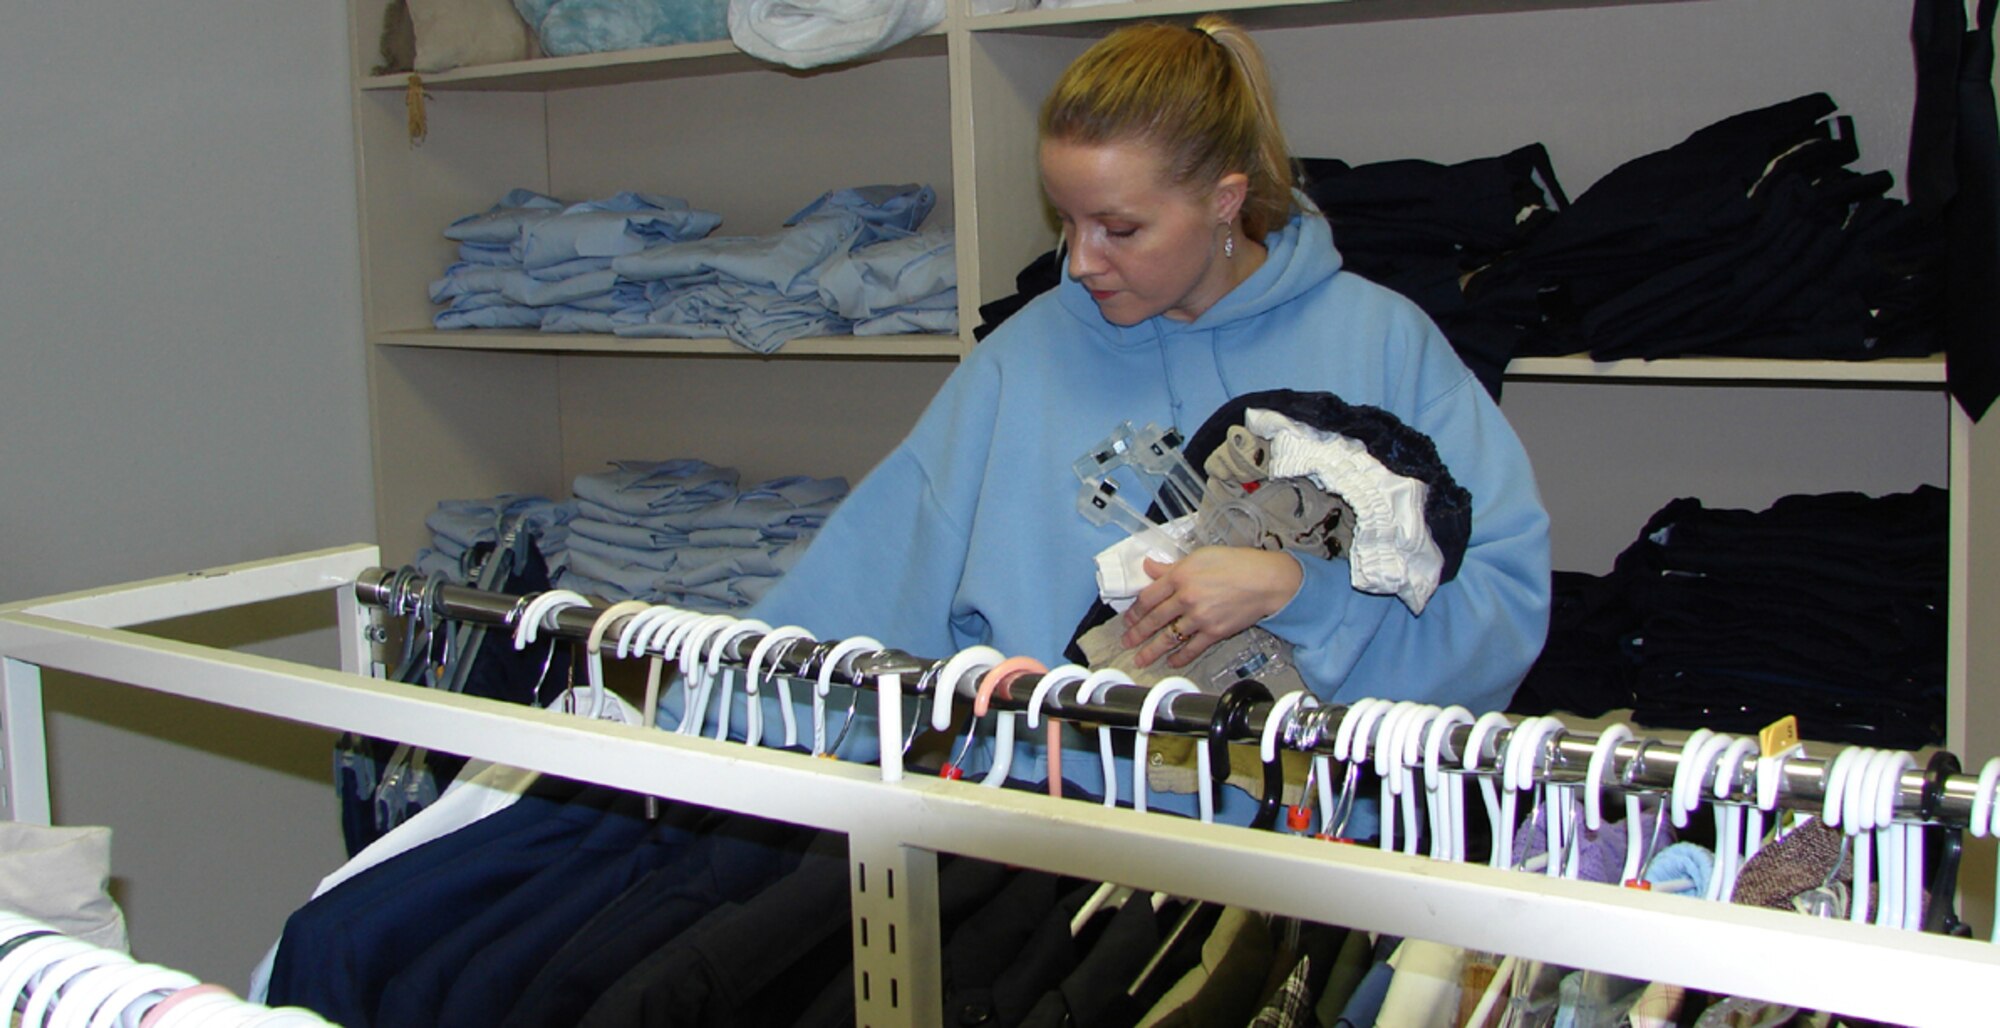 Leah Andrews, volunteer, hangs and sorts clothing at the Airman's Attic. The Airman's Attic is located in building 4000 and is open Thursdays and Saturdays from 10 a.m. to 2 p.m. E-5 and below can come to the Airman's Attic and take or borrow items for free. (U.S. Air Force photo/Senior Airman Emerald Ralston)     